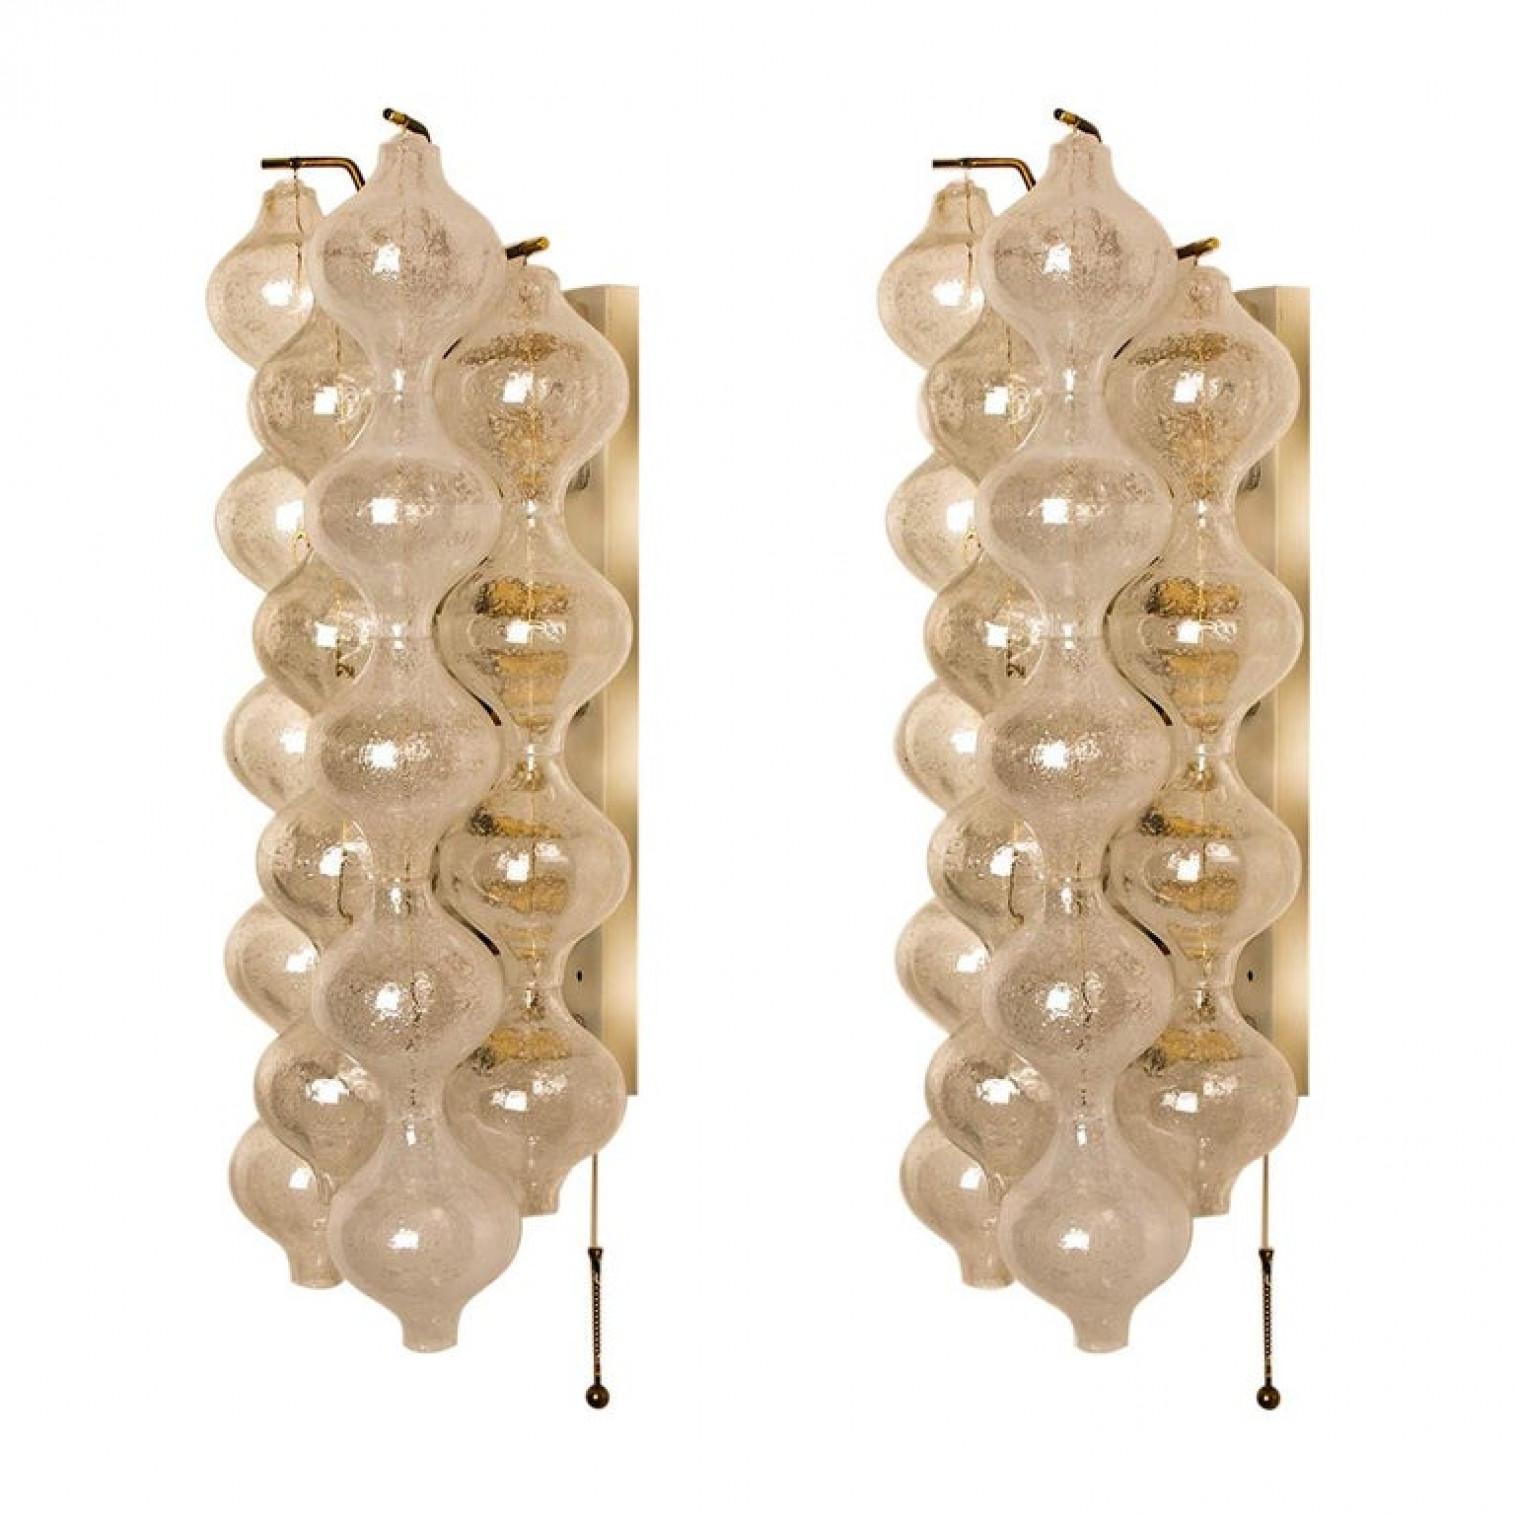 1 of the  2 pairs unique large and elegant 'Tulipan' glass wall sconces by J.T. Kalmar, Austria, Vienna, manufactured in midcentury, circa 1970 (late 1960s or-early 1970s). Tulip shaped hand blown bubble glasses. With a white enameled metal frame